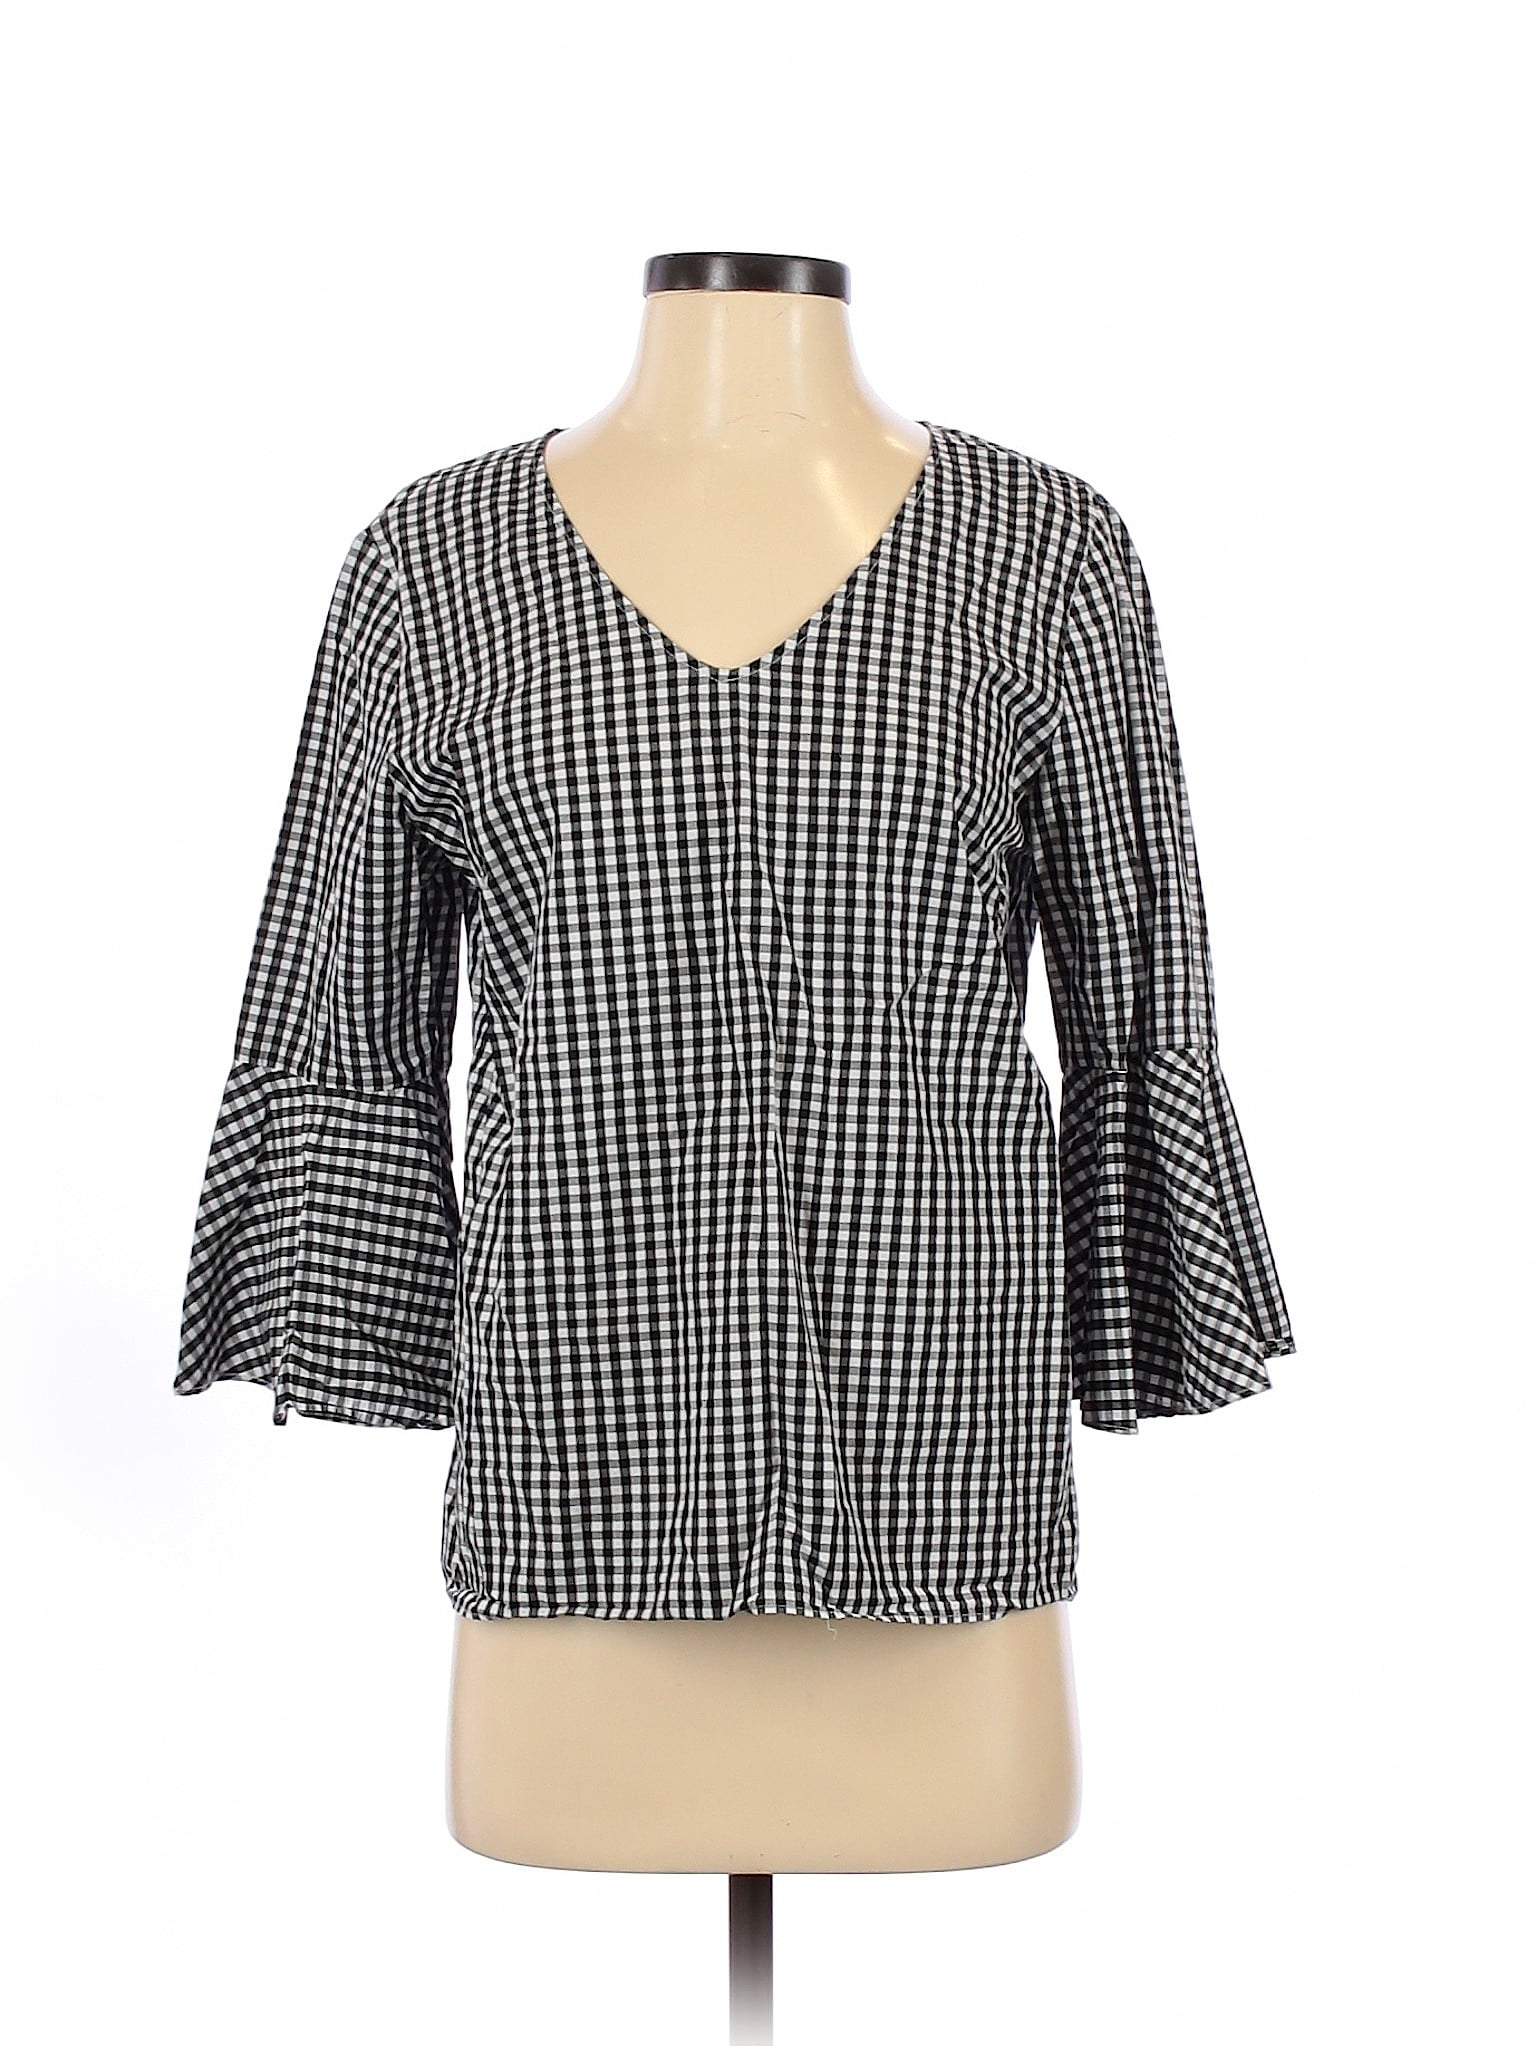 Jane and Delancey - Pre-Owned Jane and Delancey Women's Size M 3/4 ...